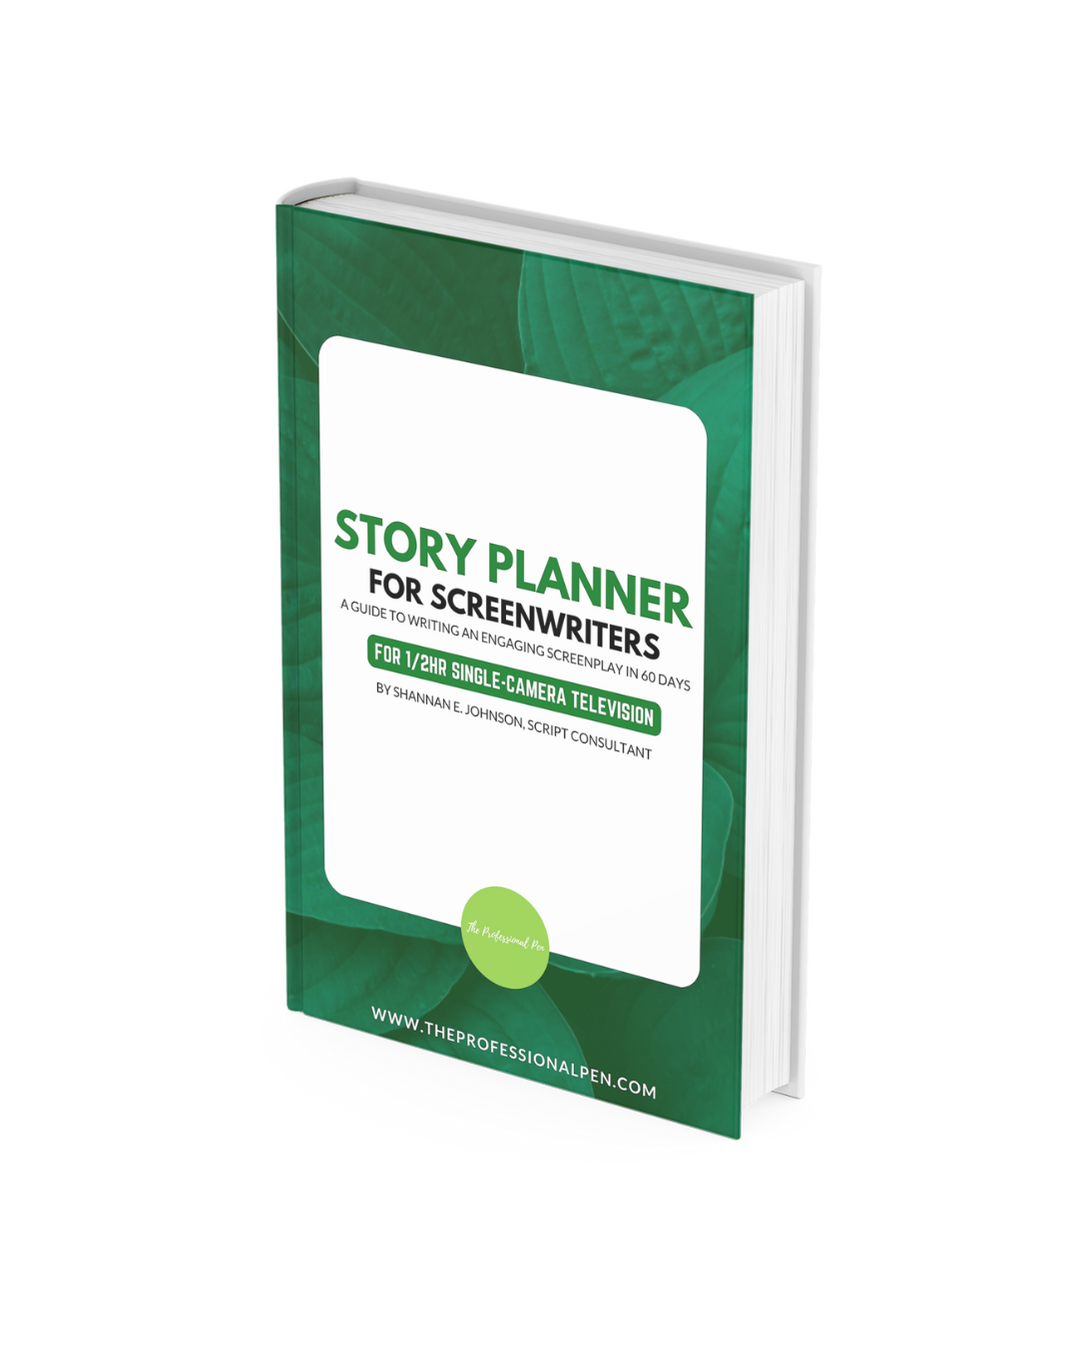 Story Planner for 1/2hr Single-Camera TV Shows The Professional Pen